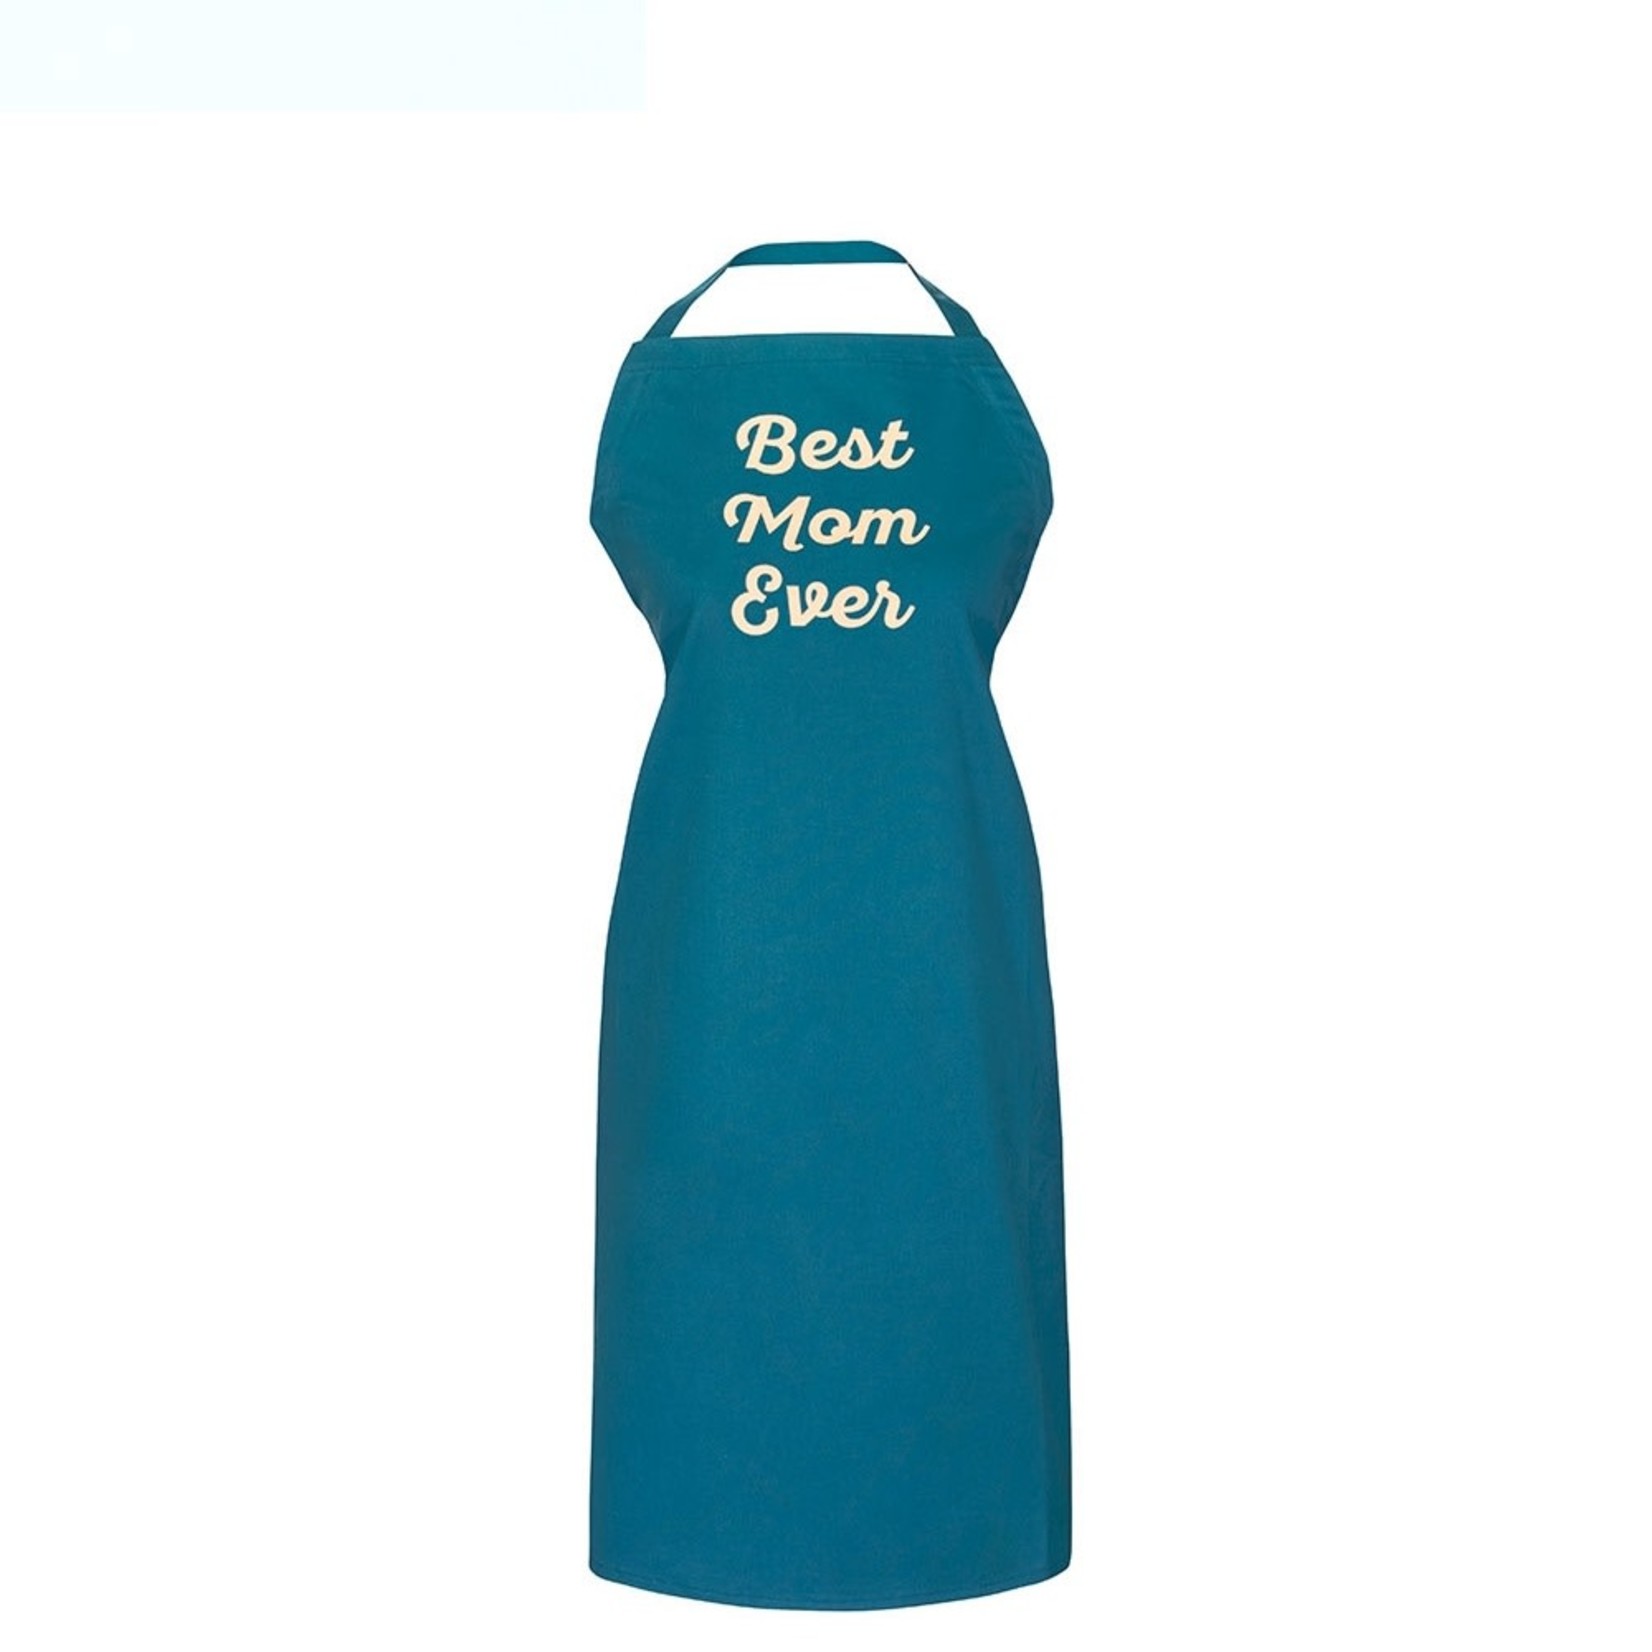 About Face Designs Apron Best Mom Ever